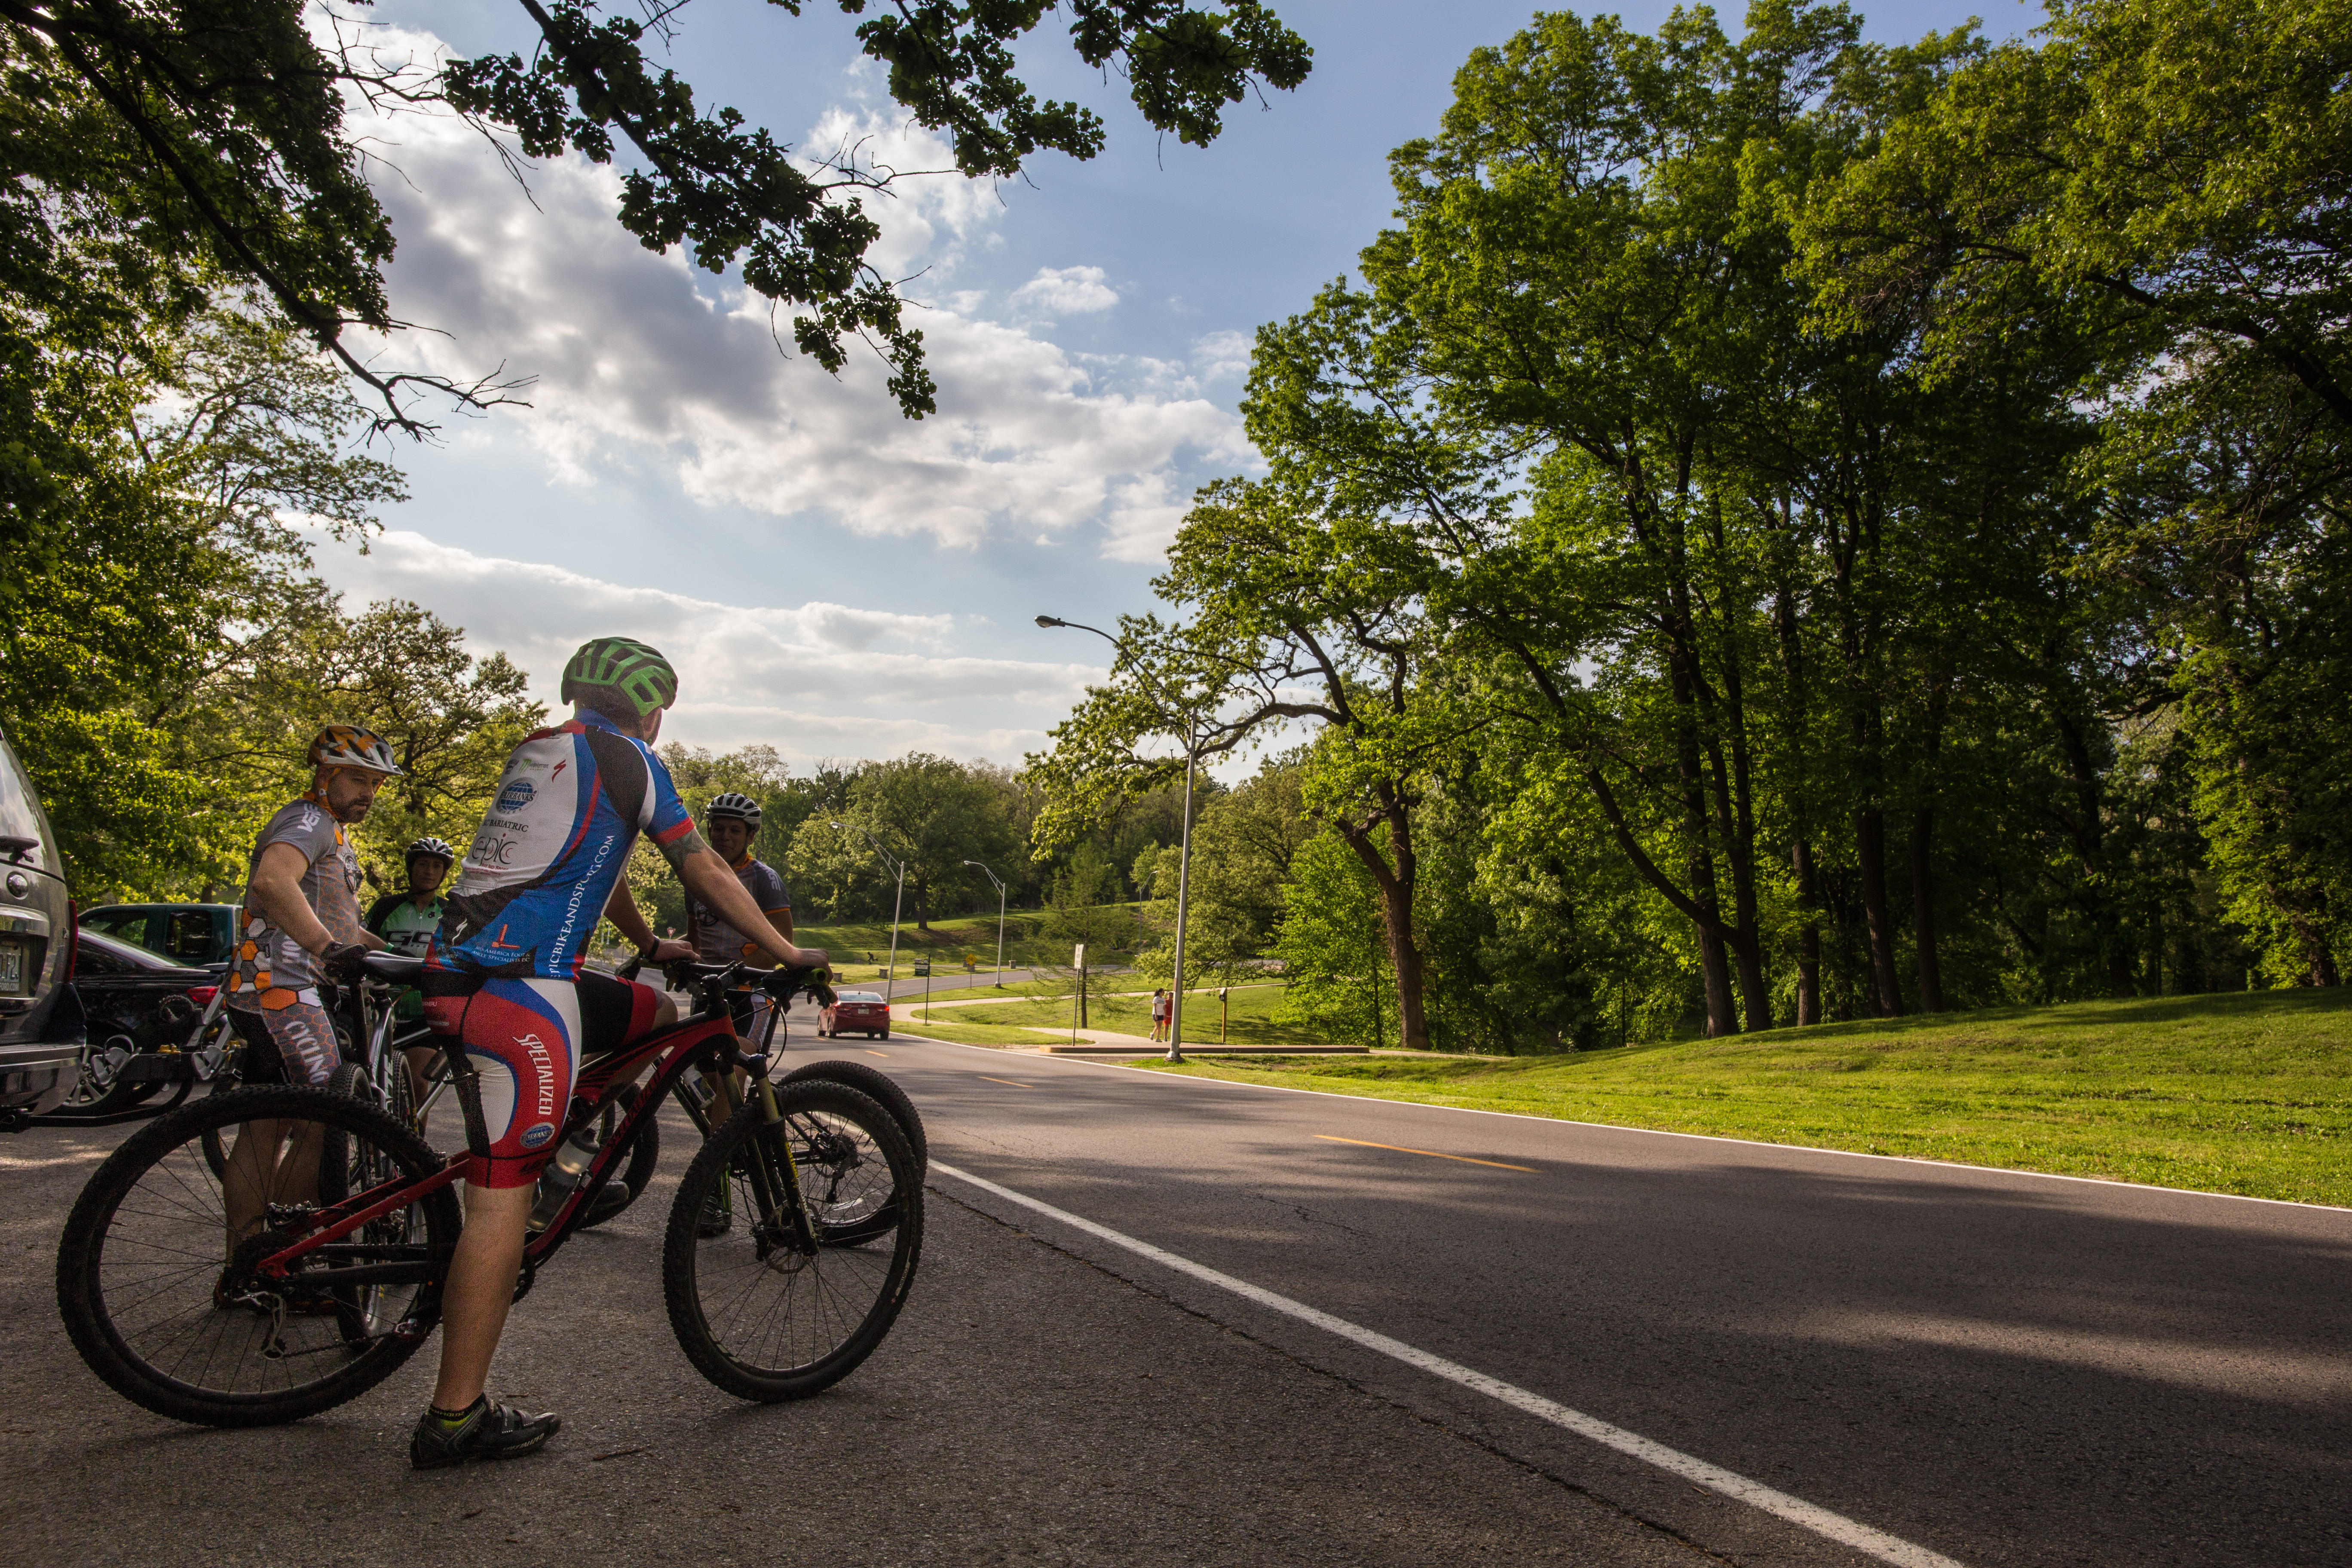 Mountain bikers frequently take advantage of many vast trails systems that are scattered along St. Joseph's Parkway. (Photo by: Patrick P. Evenson)